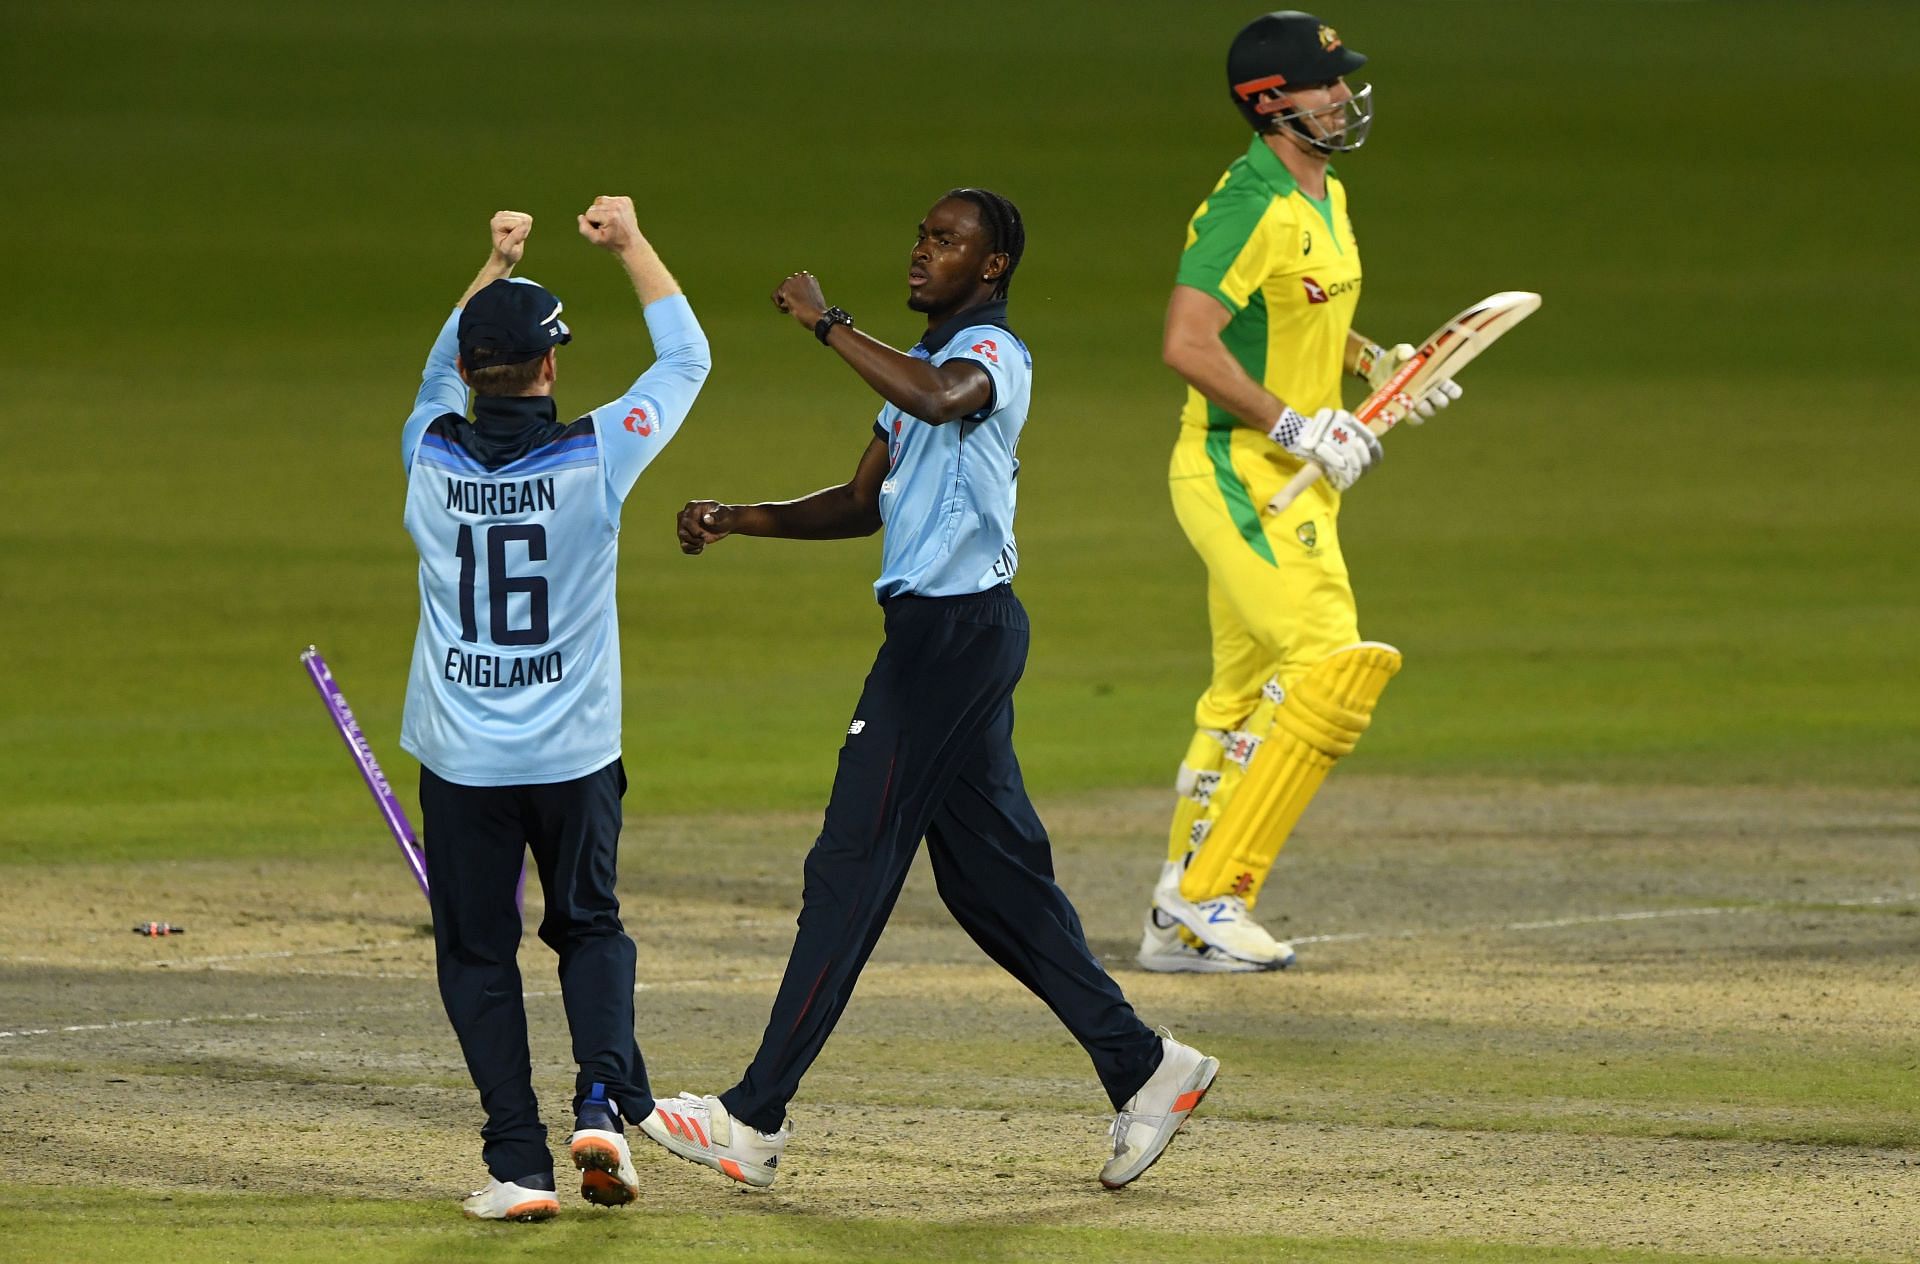 Eoin Morgan and Jofra Archer. (Credits: Getty)